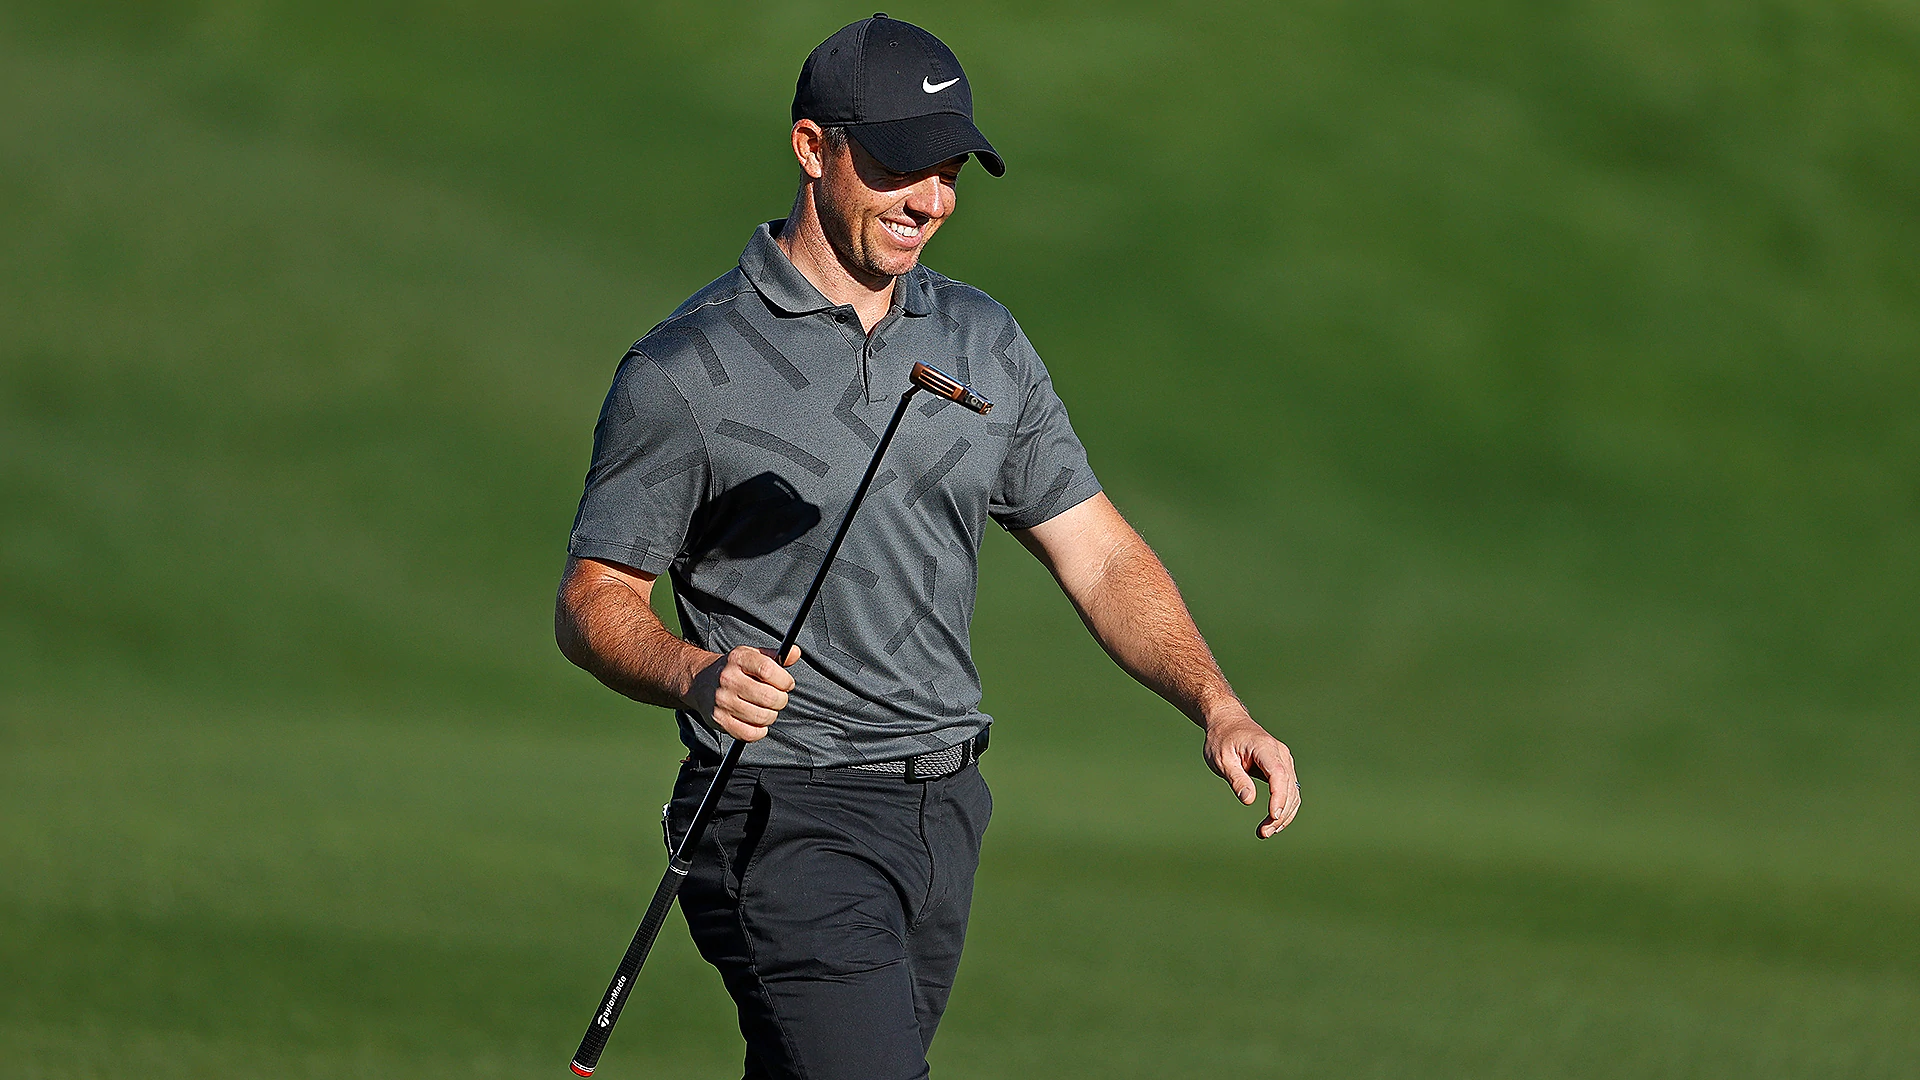 Rory McIlroy starts 3 over through two holes, rallies for under-par round at WMPO